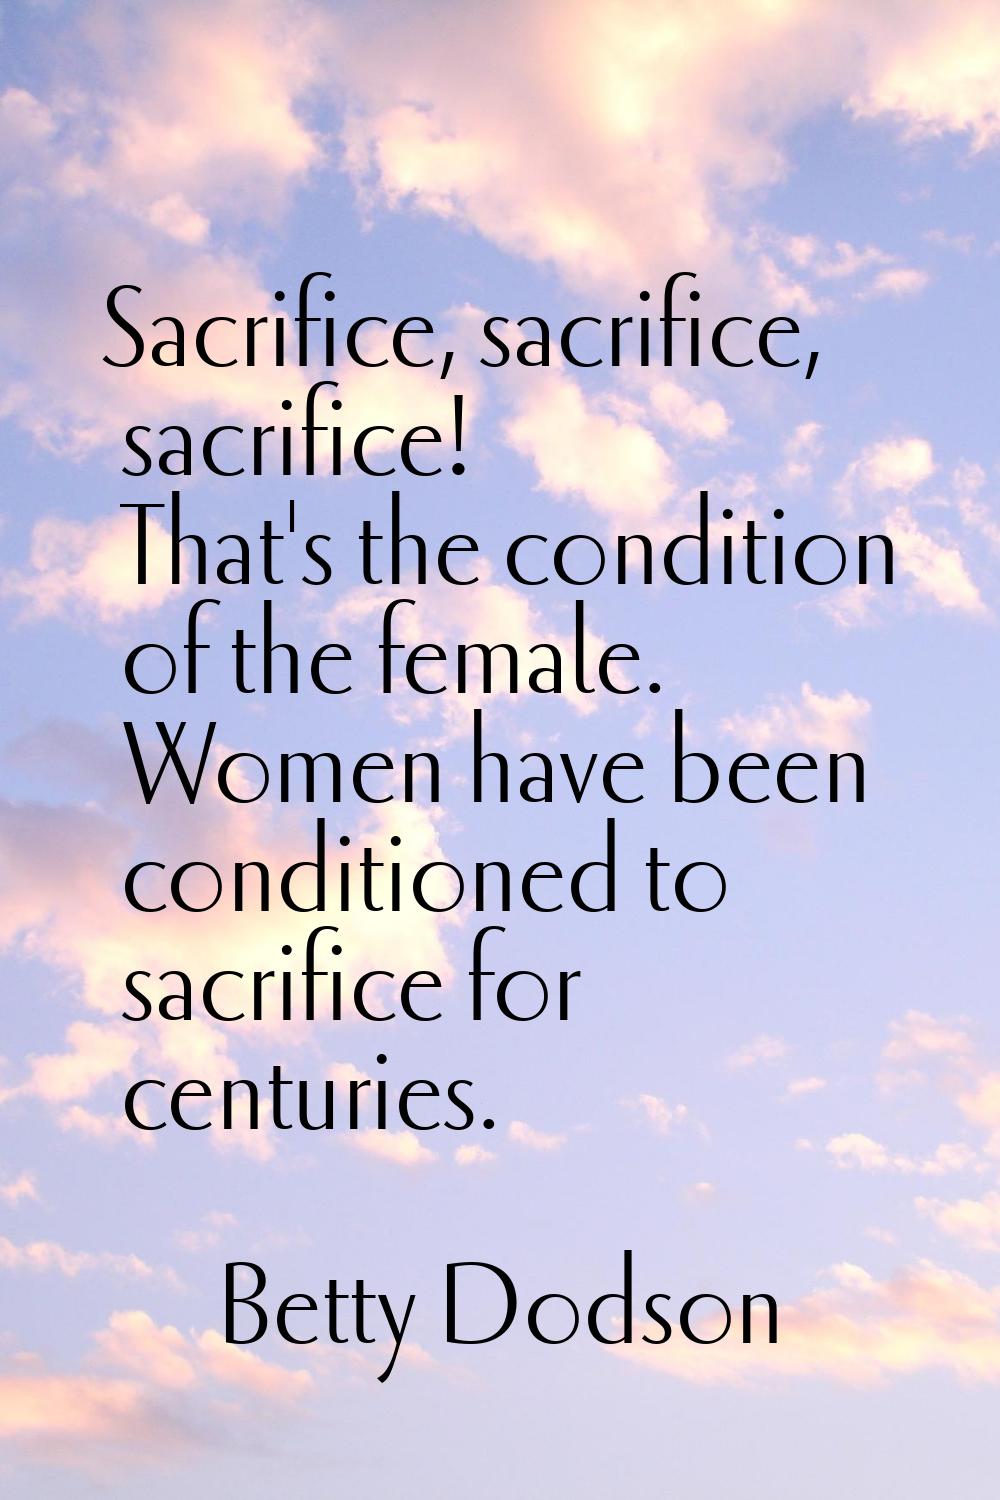 Sacrifice, sacrifice, sacrifice! That's the condition of the female. Women have been conditioned to